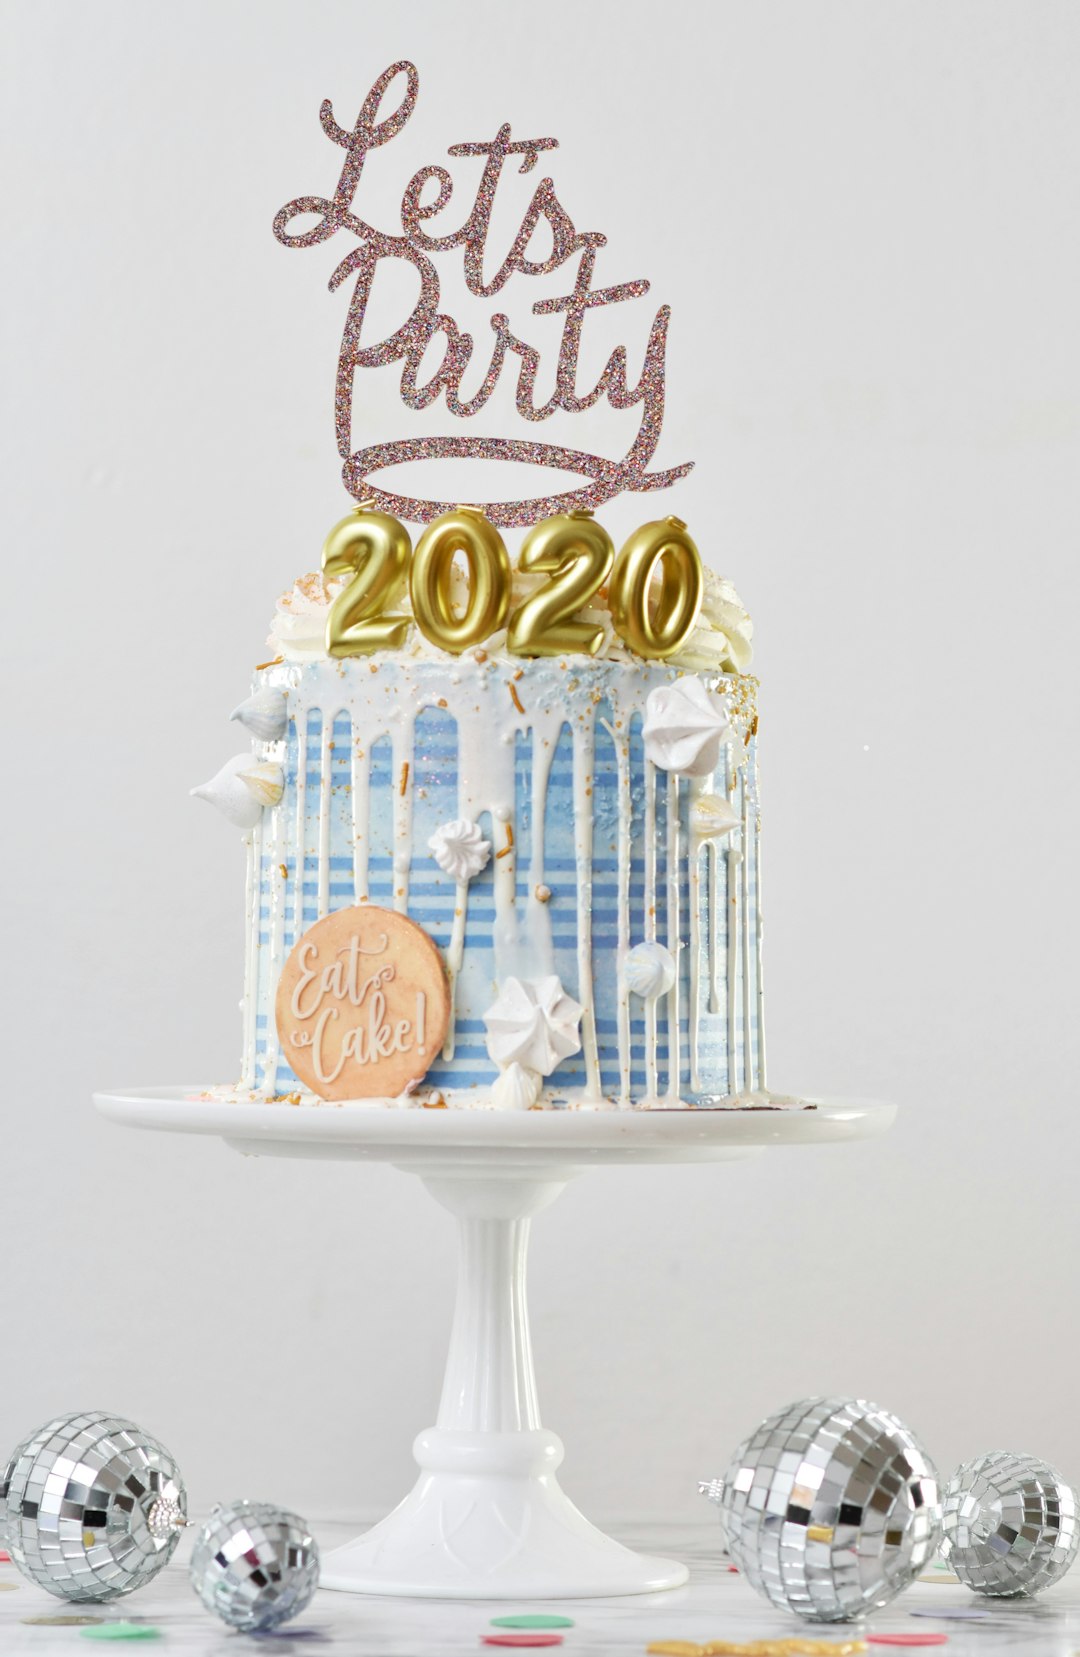 Let's Party 2020 cake on stand